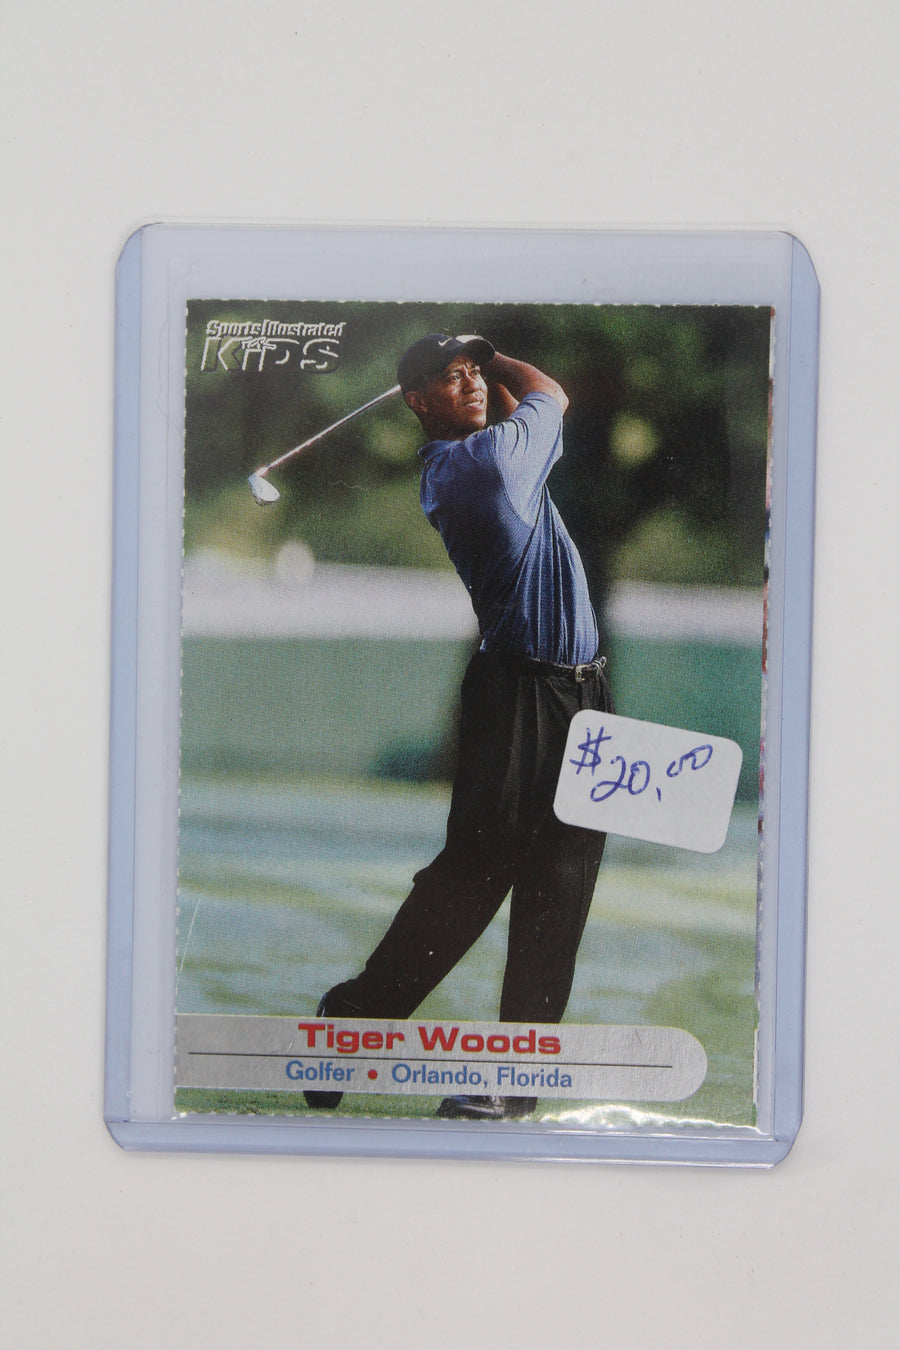 Tiger Woods 2002 Sports Illustrated for Kids Series 3 Card